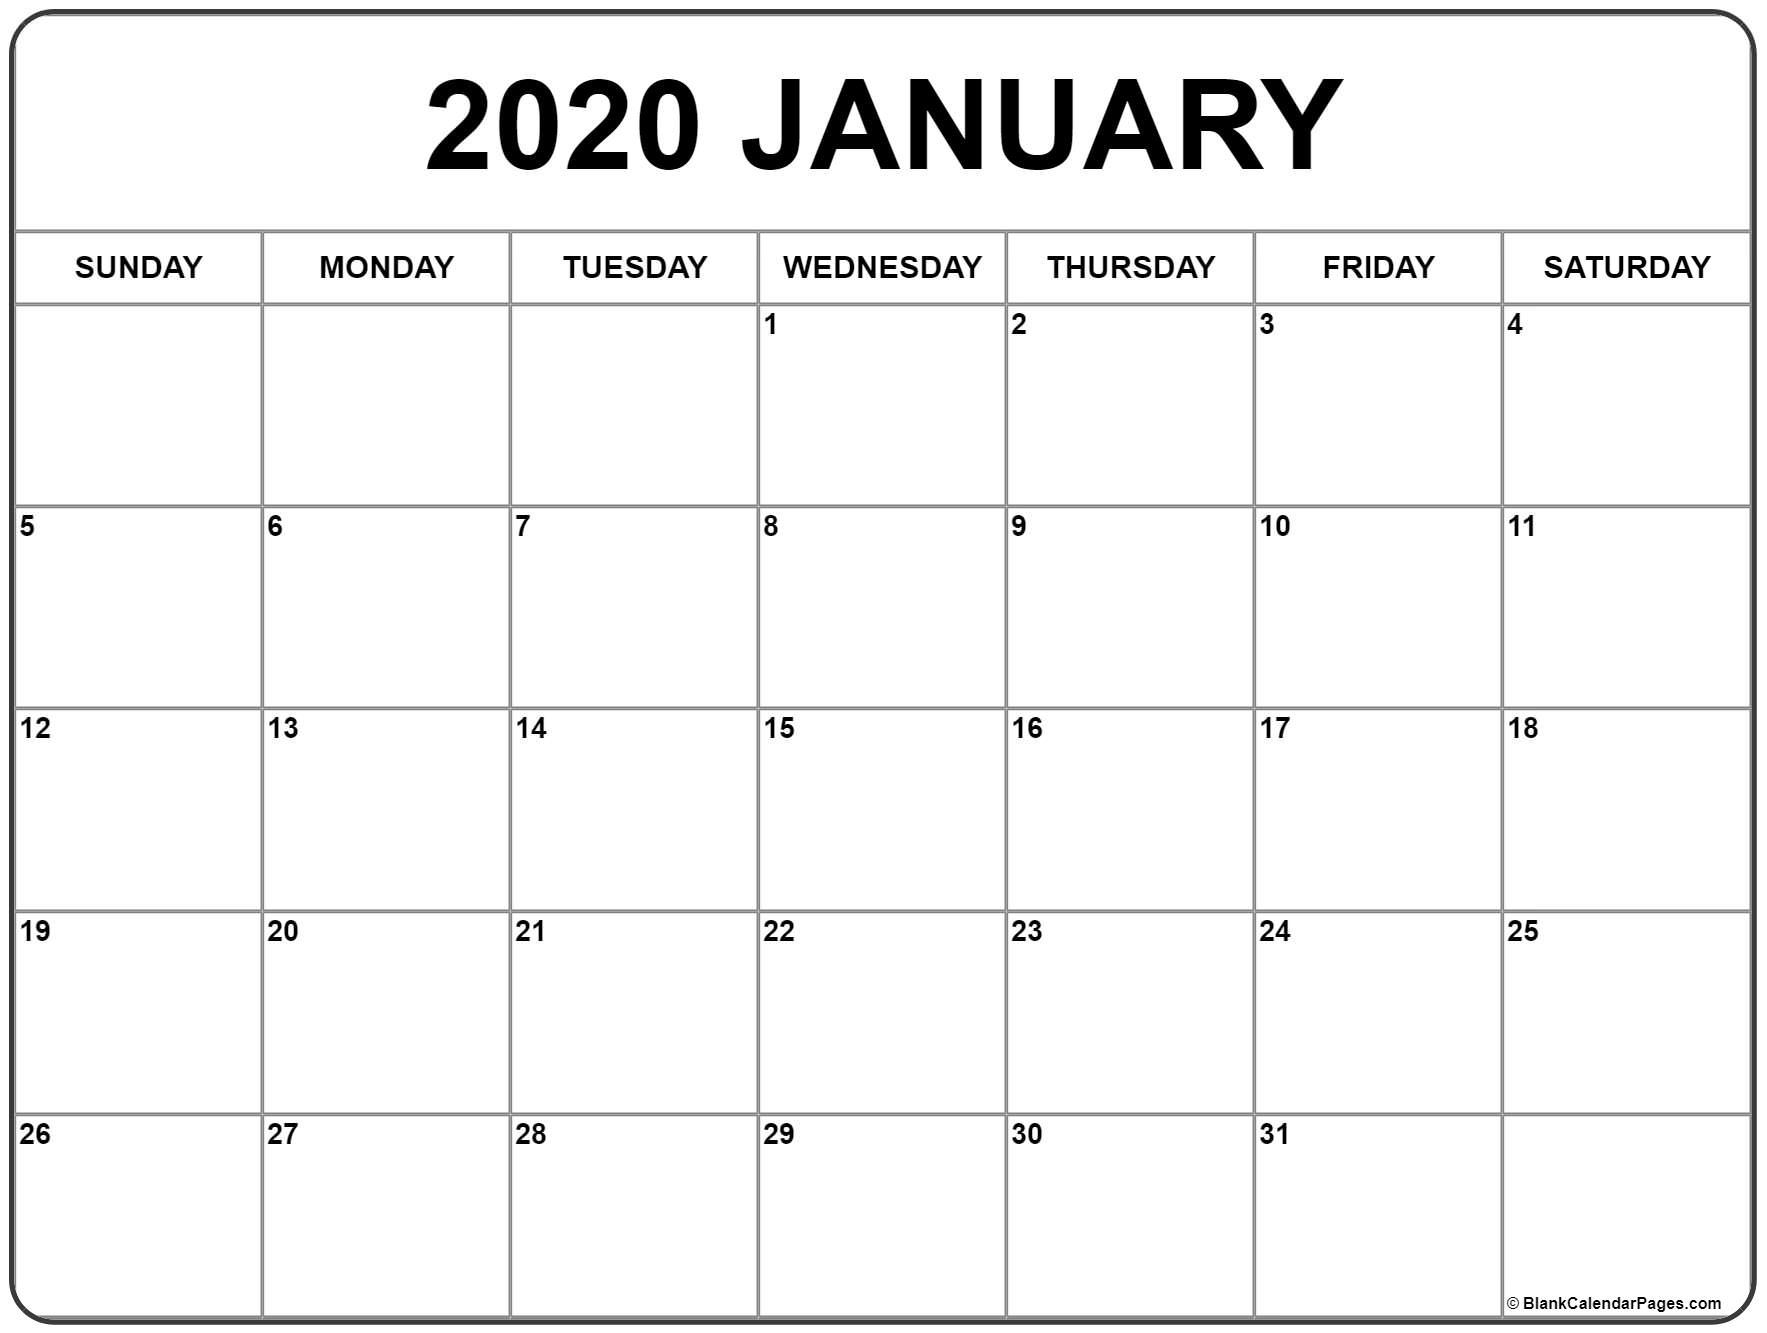 Get 2020 Printable Calendar With Large Squares | Calendar Printables with regard to Calendars With Large Squares